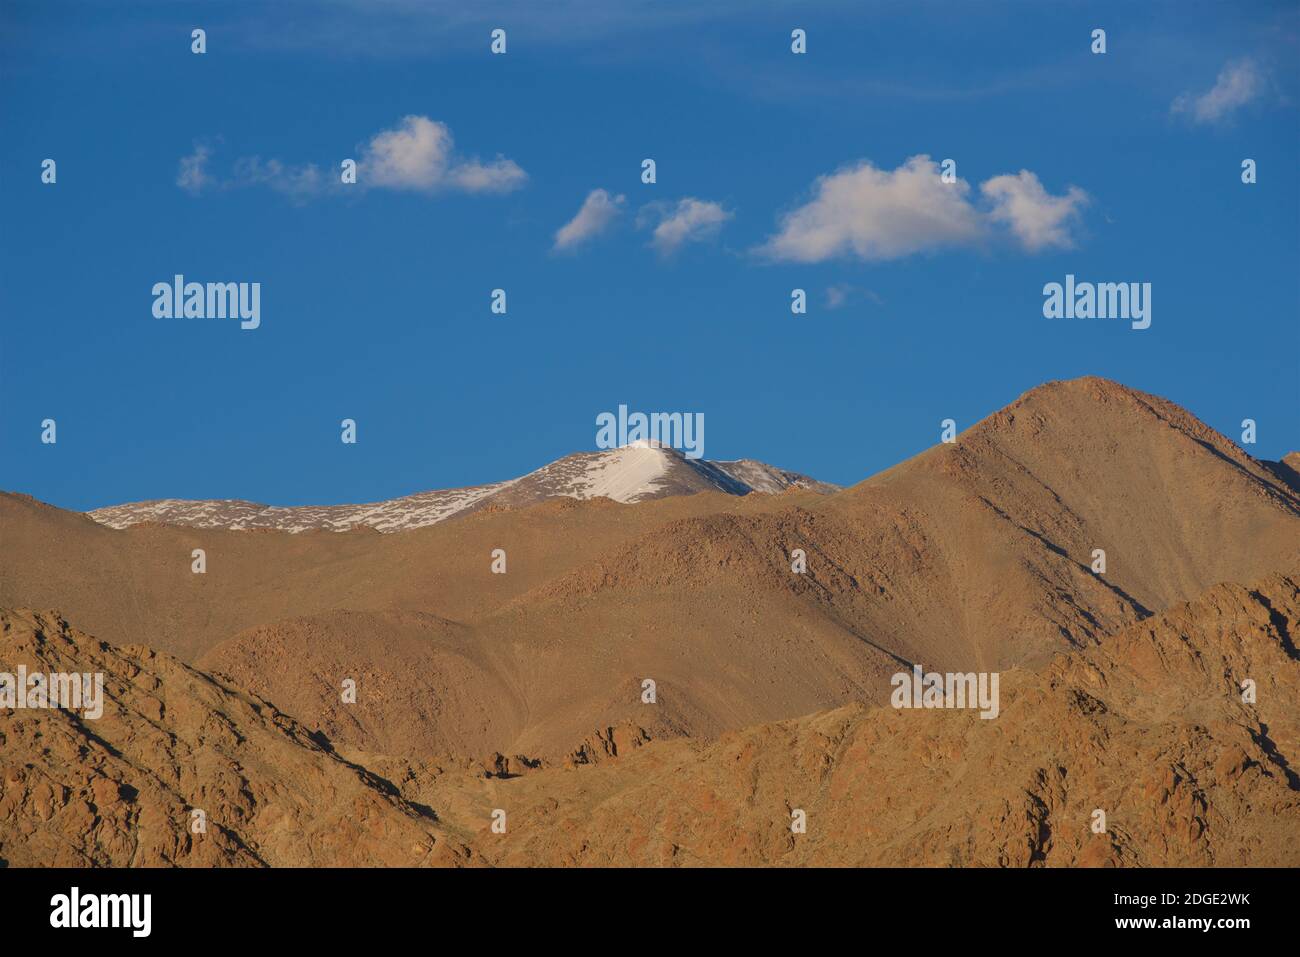 Late afternoon view of the landscape surrounding the Shanti Stupa at Chanspa, Leh district, Ladakh, Jammu and Kashmir, India in July Stock Photo